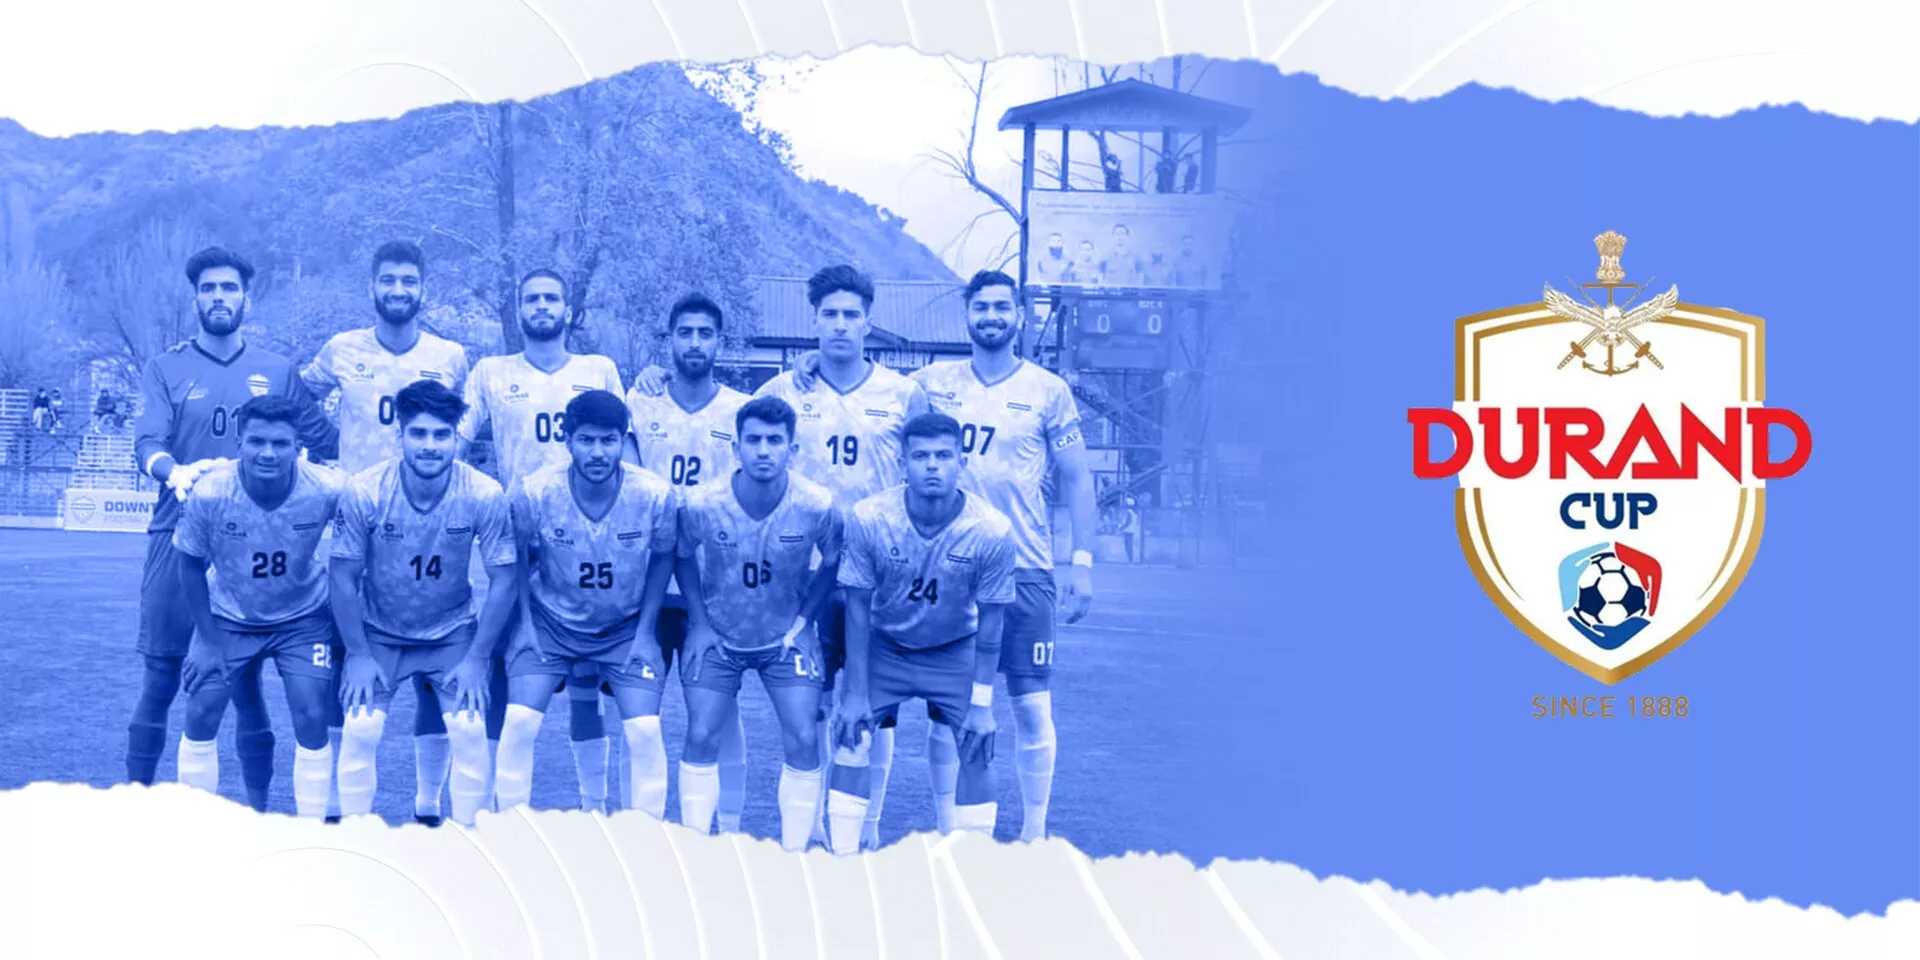 Downtown Heroes FC Durand Cup I-League Second Division Srinagar